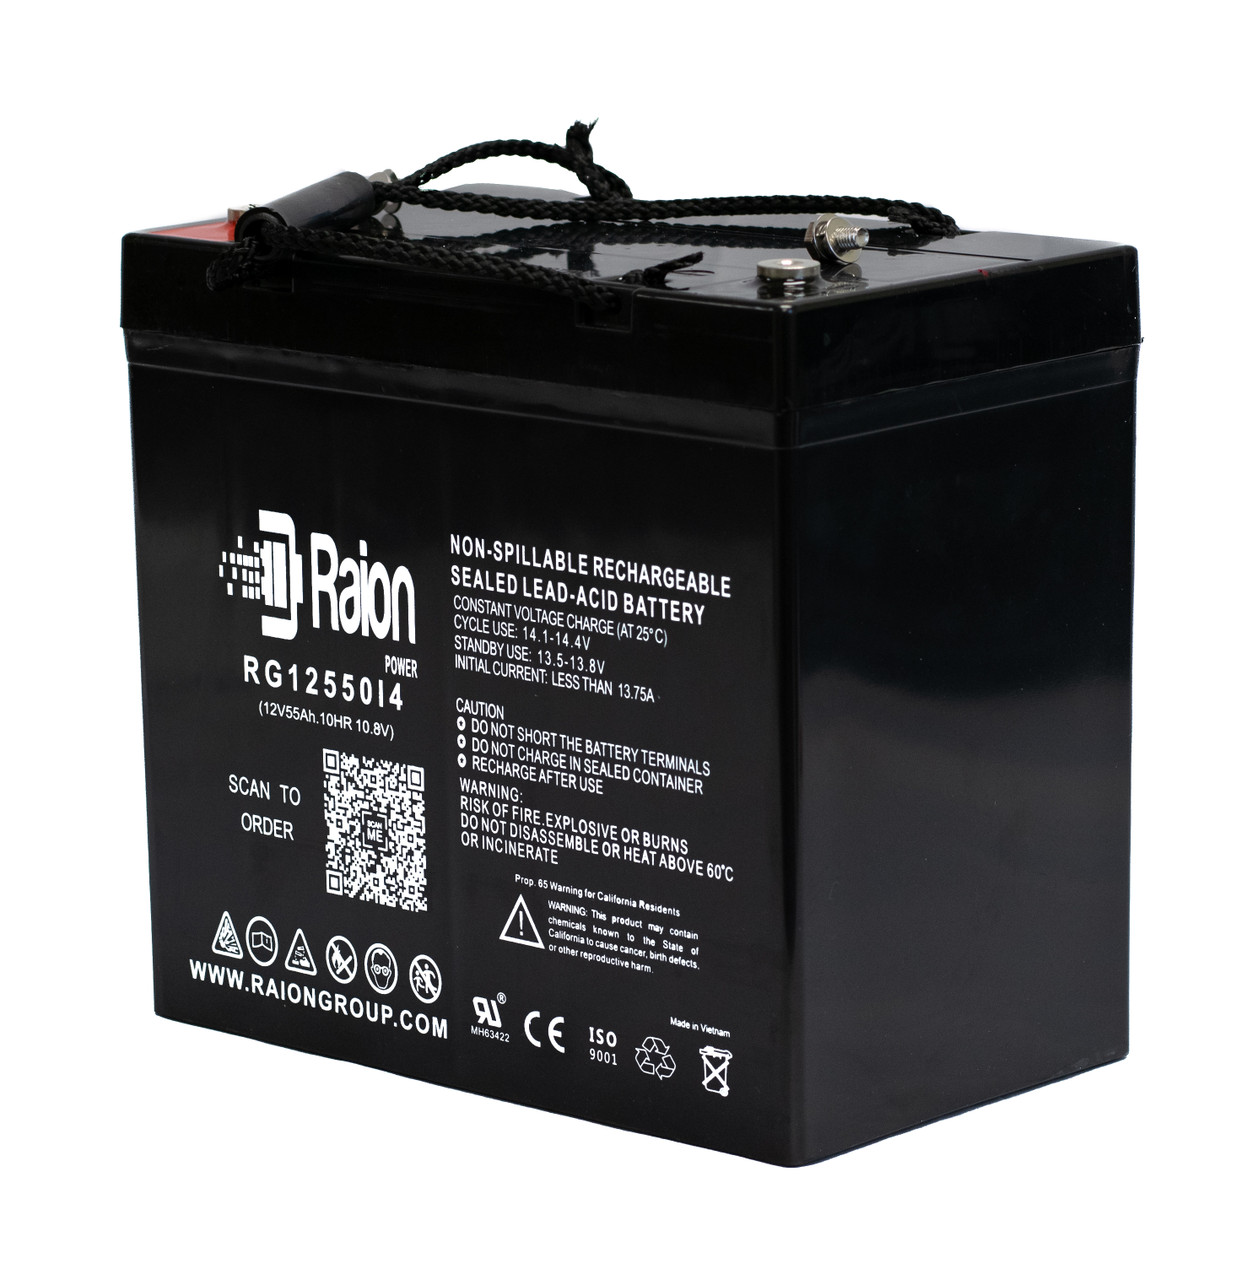 Raion Power 12V 55Ah 22NF Mobility Scooter Battery Replacement for Quickie P190 AGM